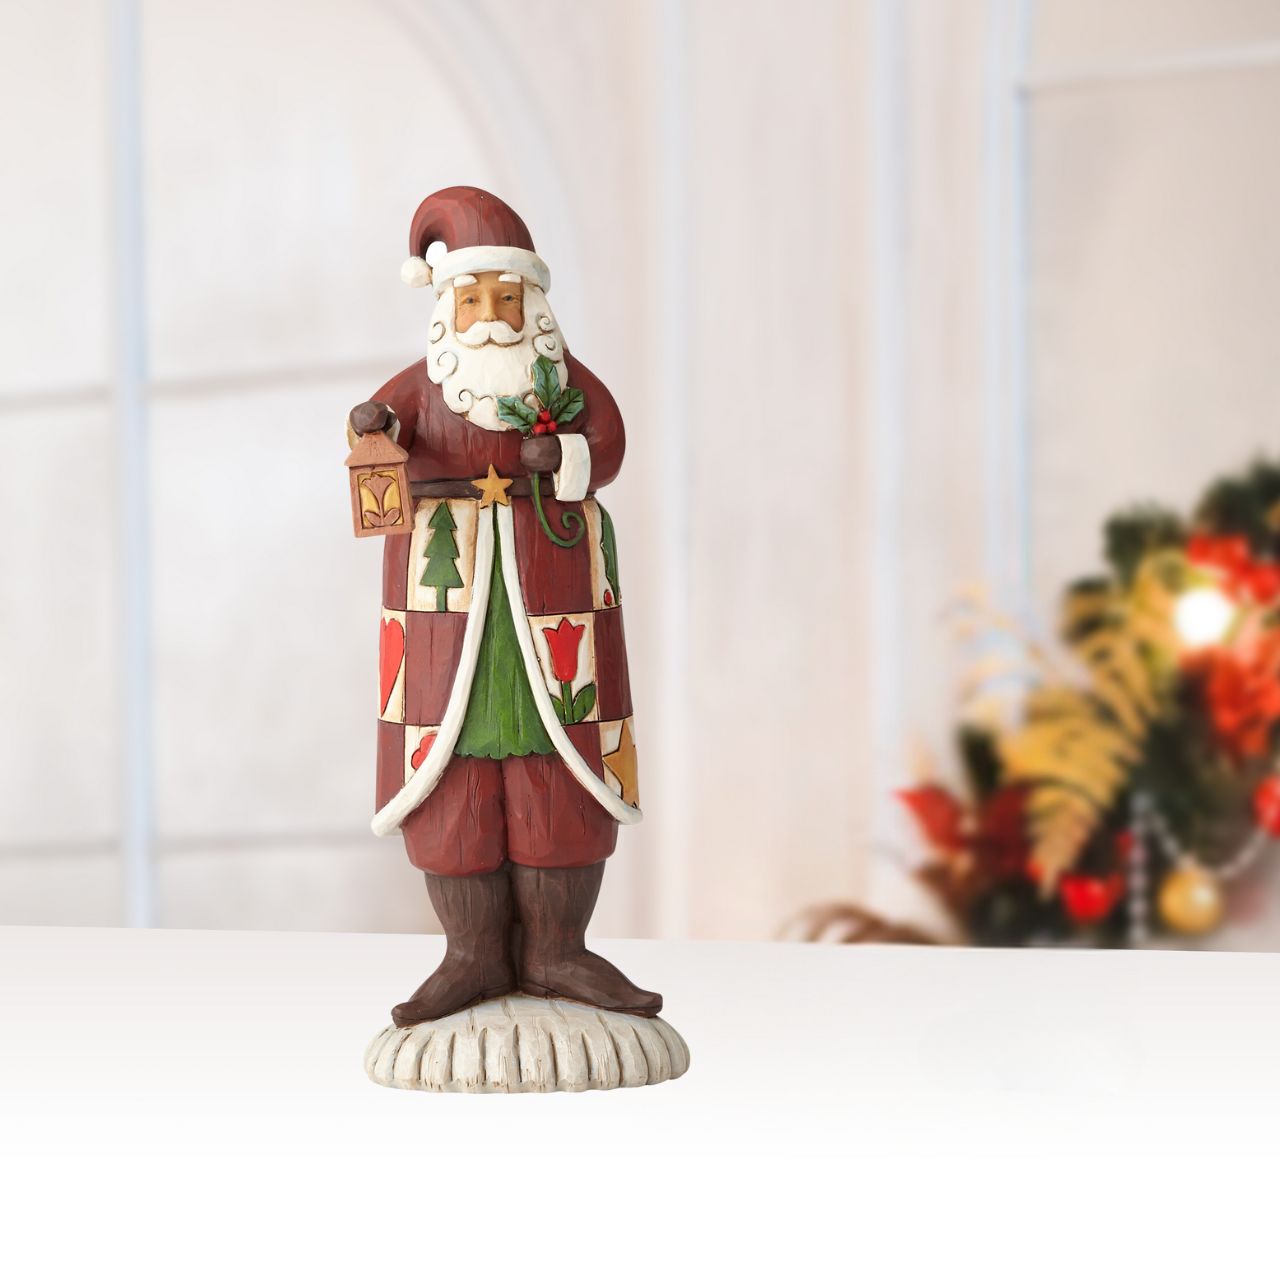 Heartwood Creek Folklore Santa With Lantern  The Folklore collection features Jim Shore's signature colour palette and heartfelt, rustic design. Cloaked in a charming patchwork of quaint holiday symbols, this handcrafted Santa holds a traditional lantern and cheery sprig of holly.